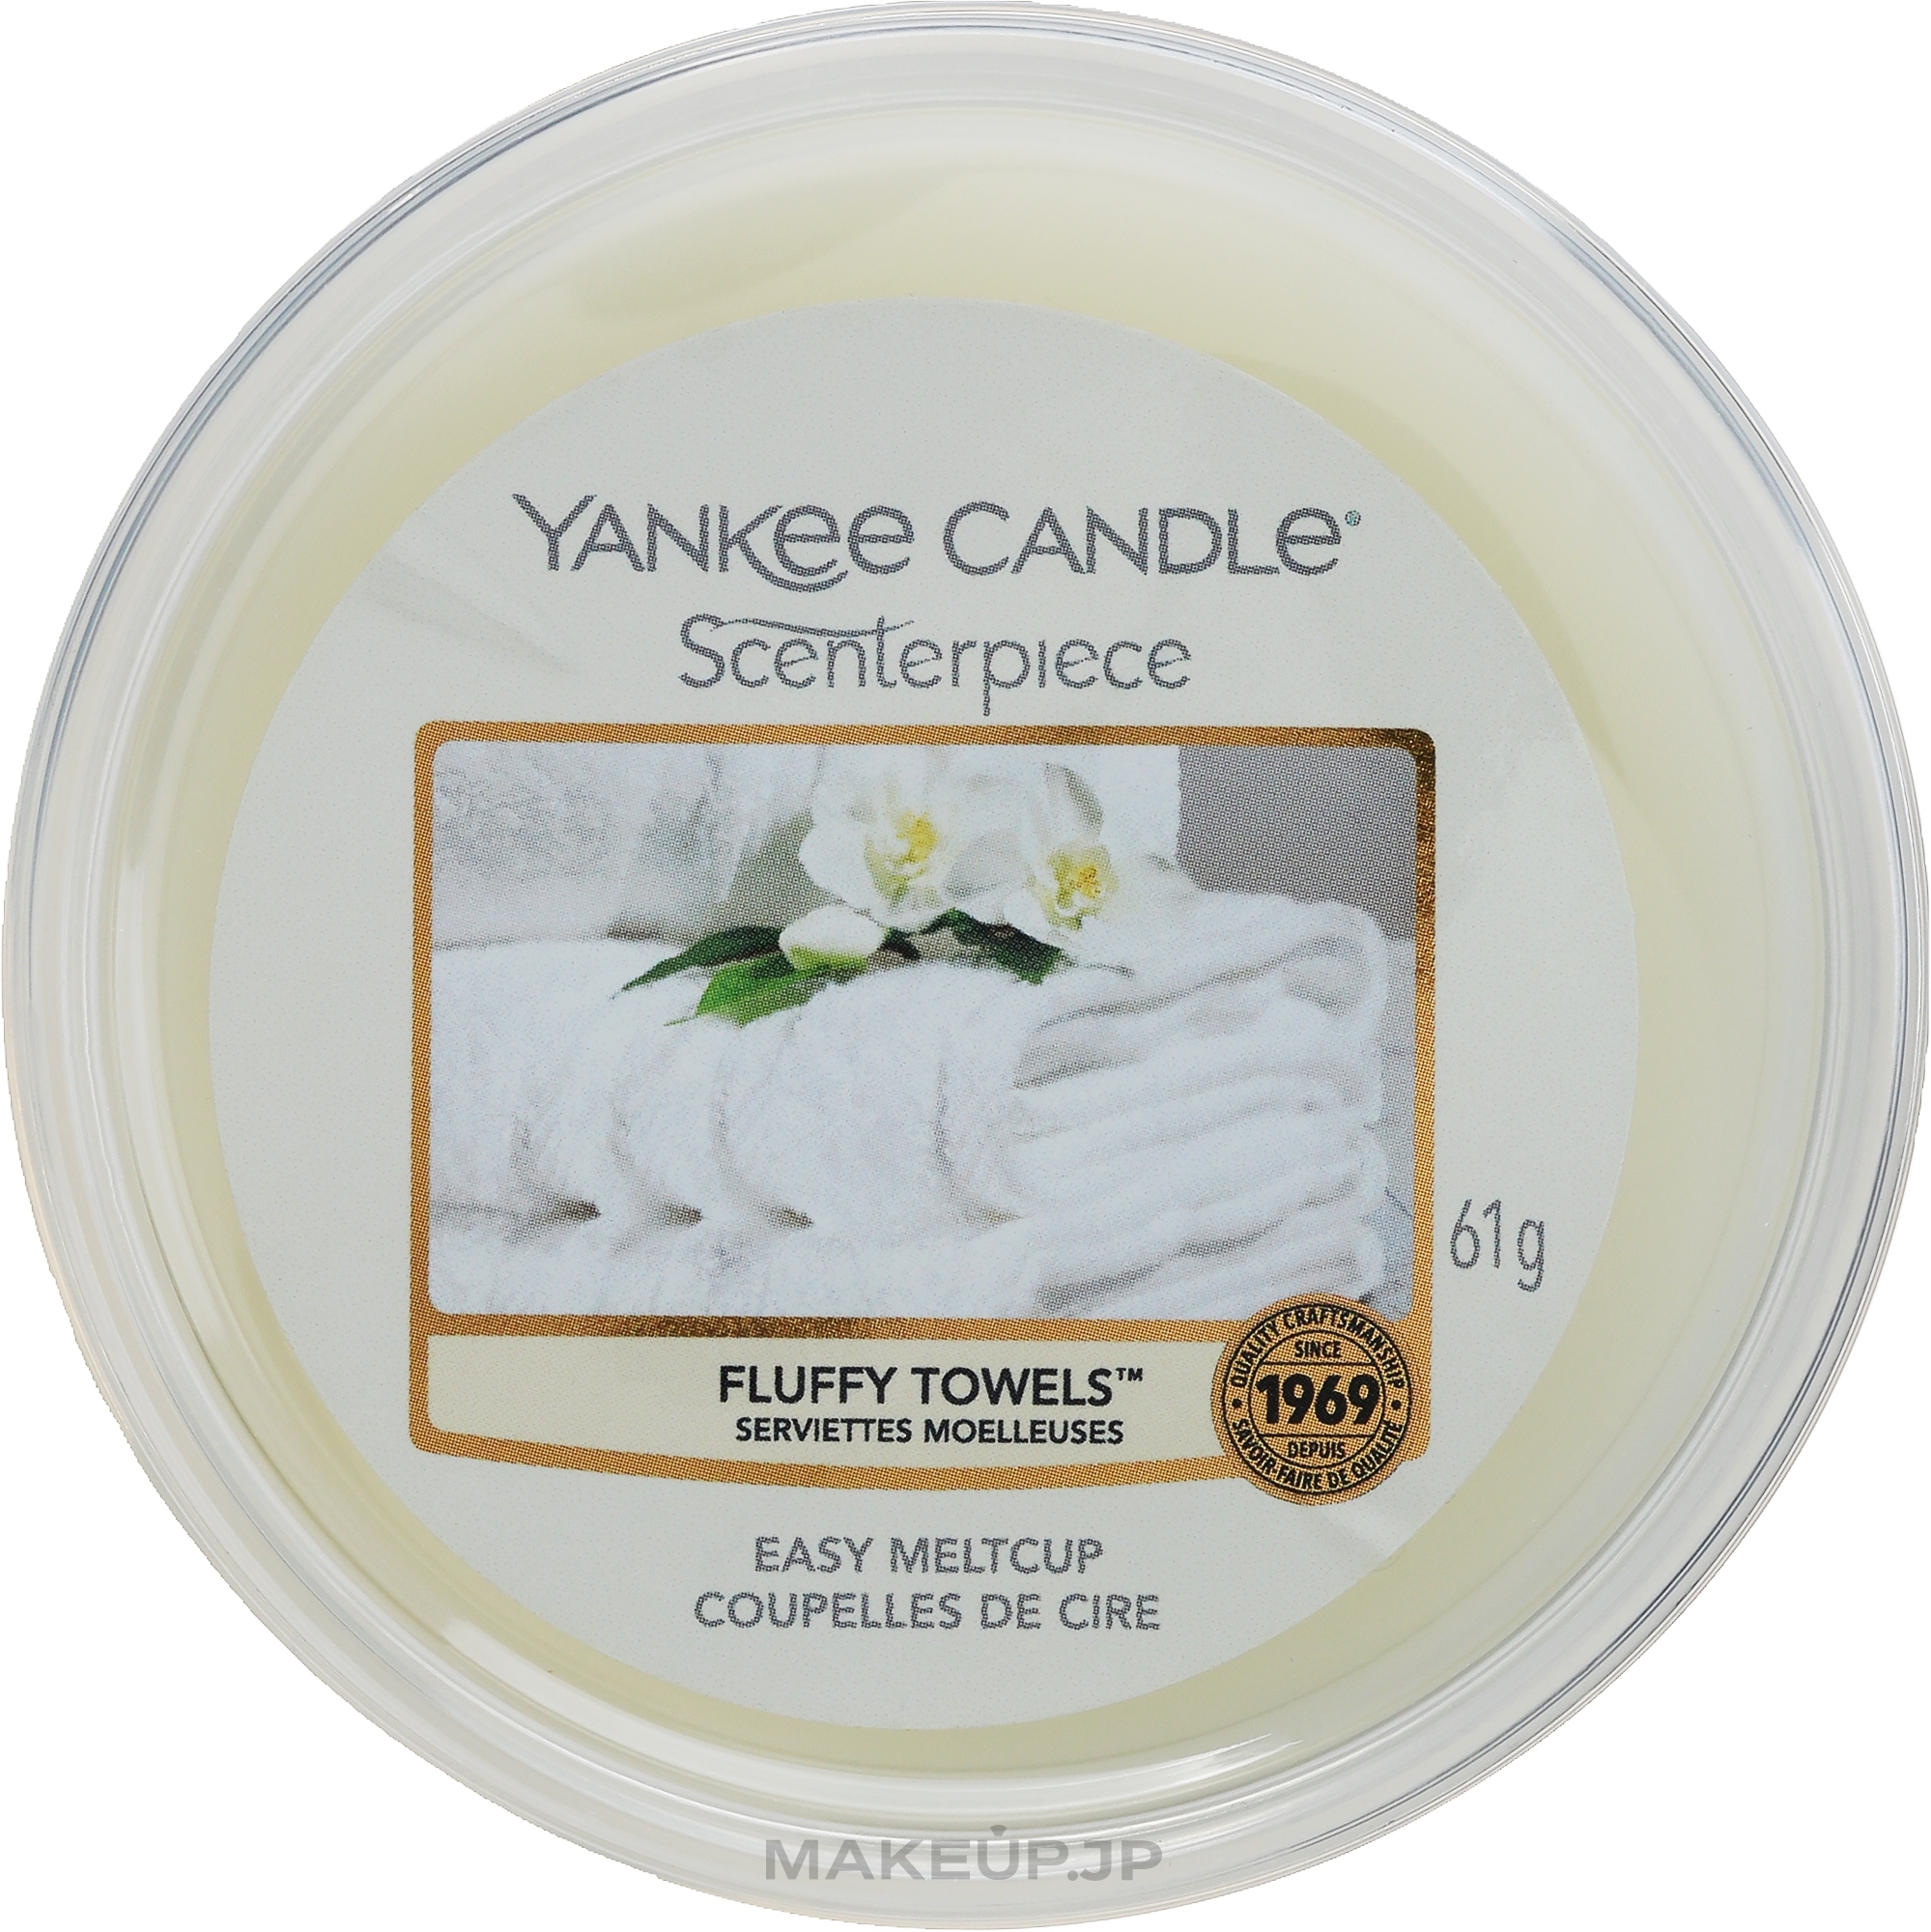 Scented Wax - Yankee Candle Fluffy Towels Scenterpiece Melt Cup — photo 61 g